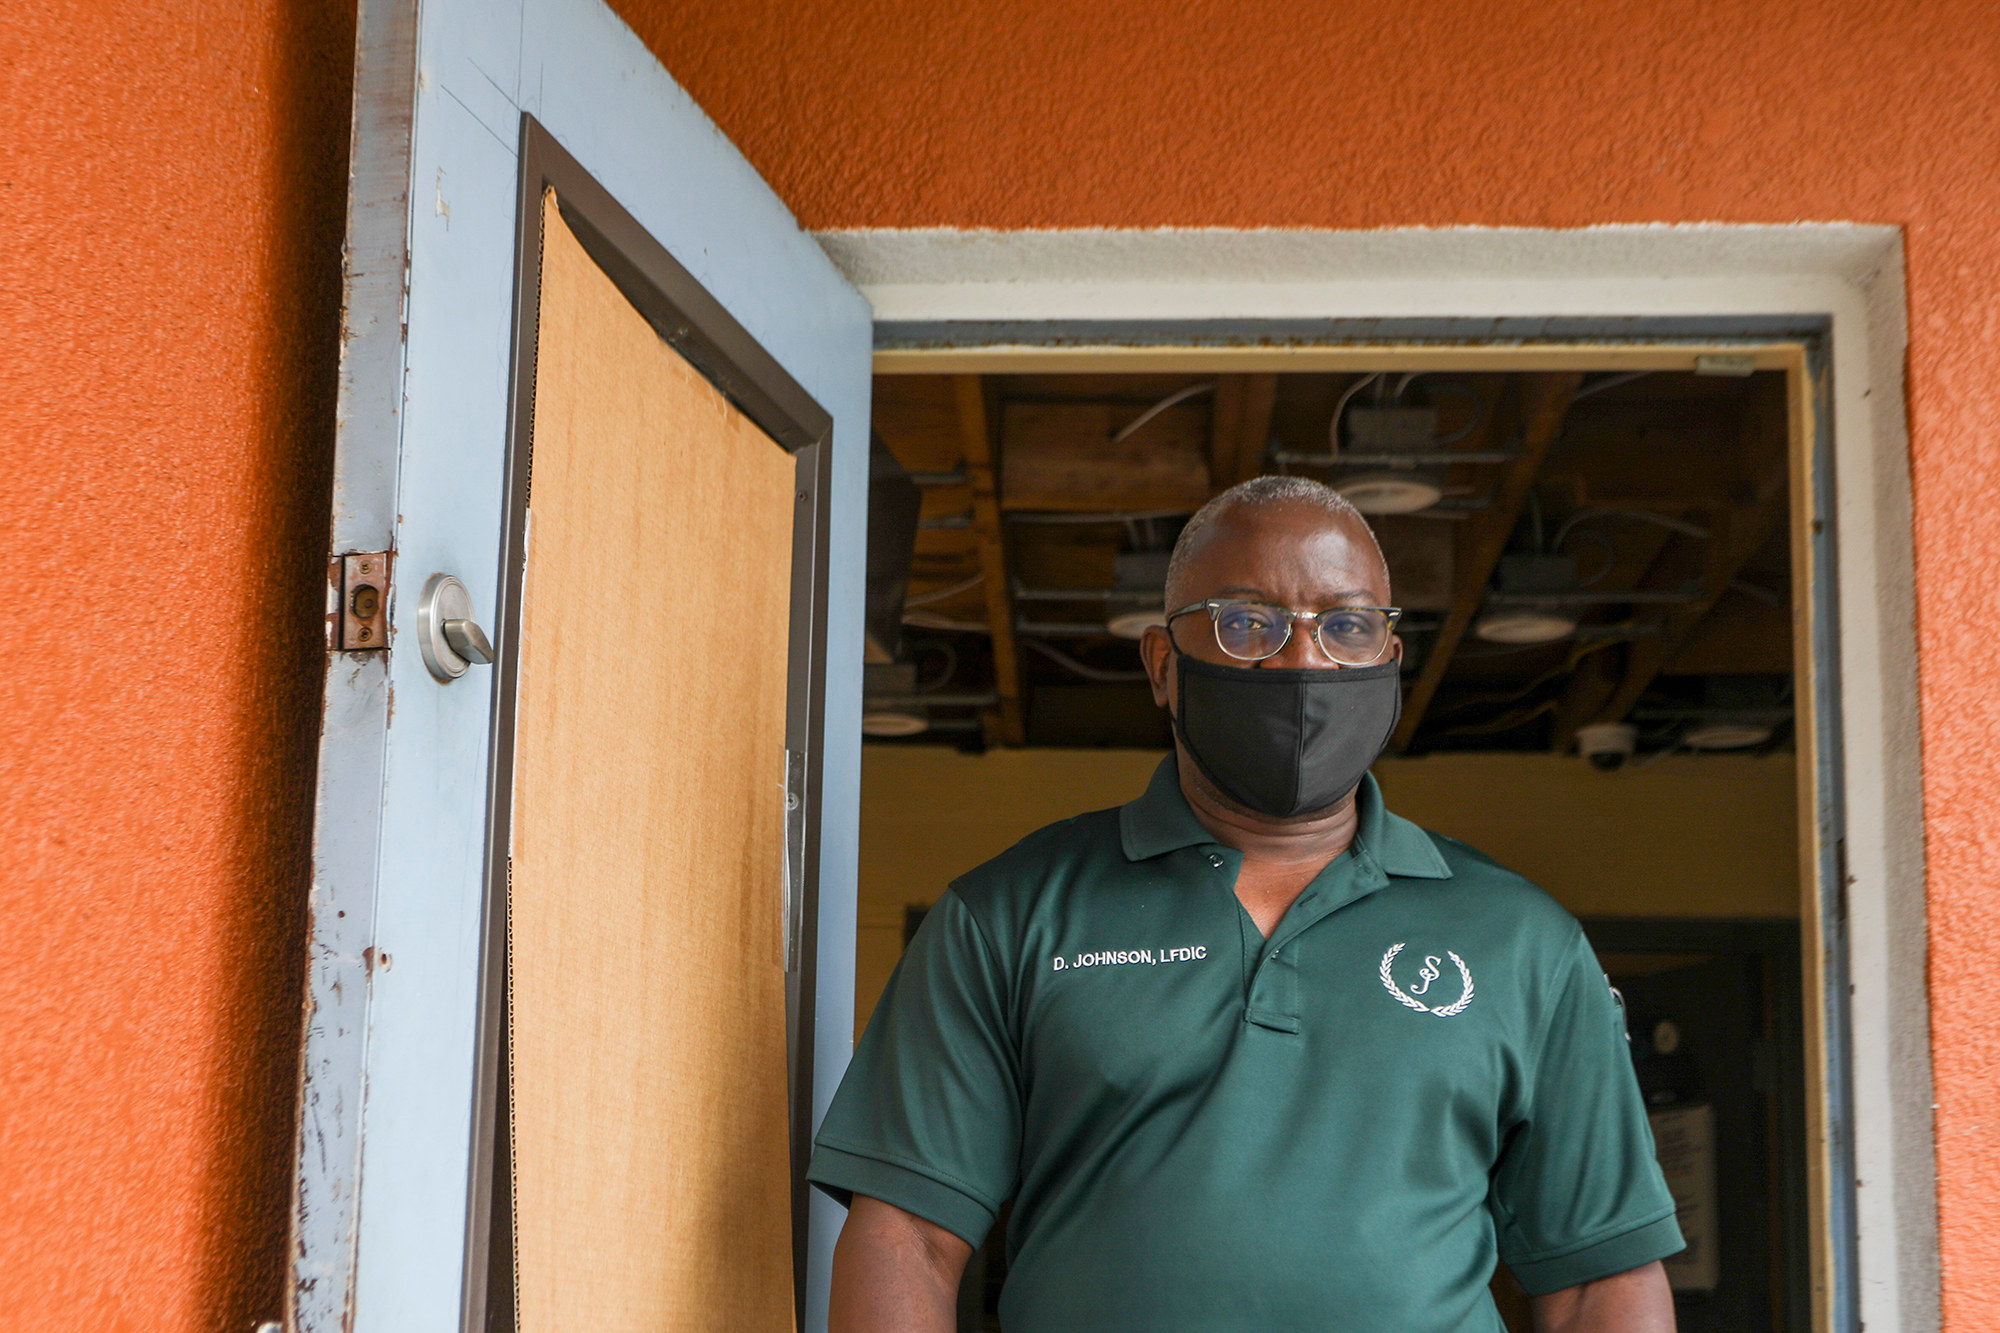 Darrell Johnson, wearing a face mask, stands in a doorway